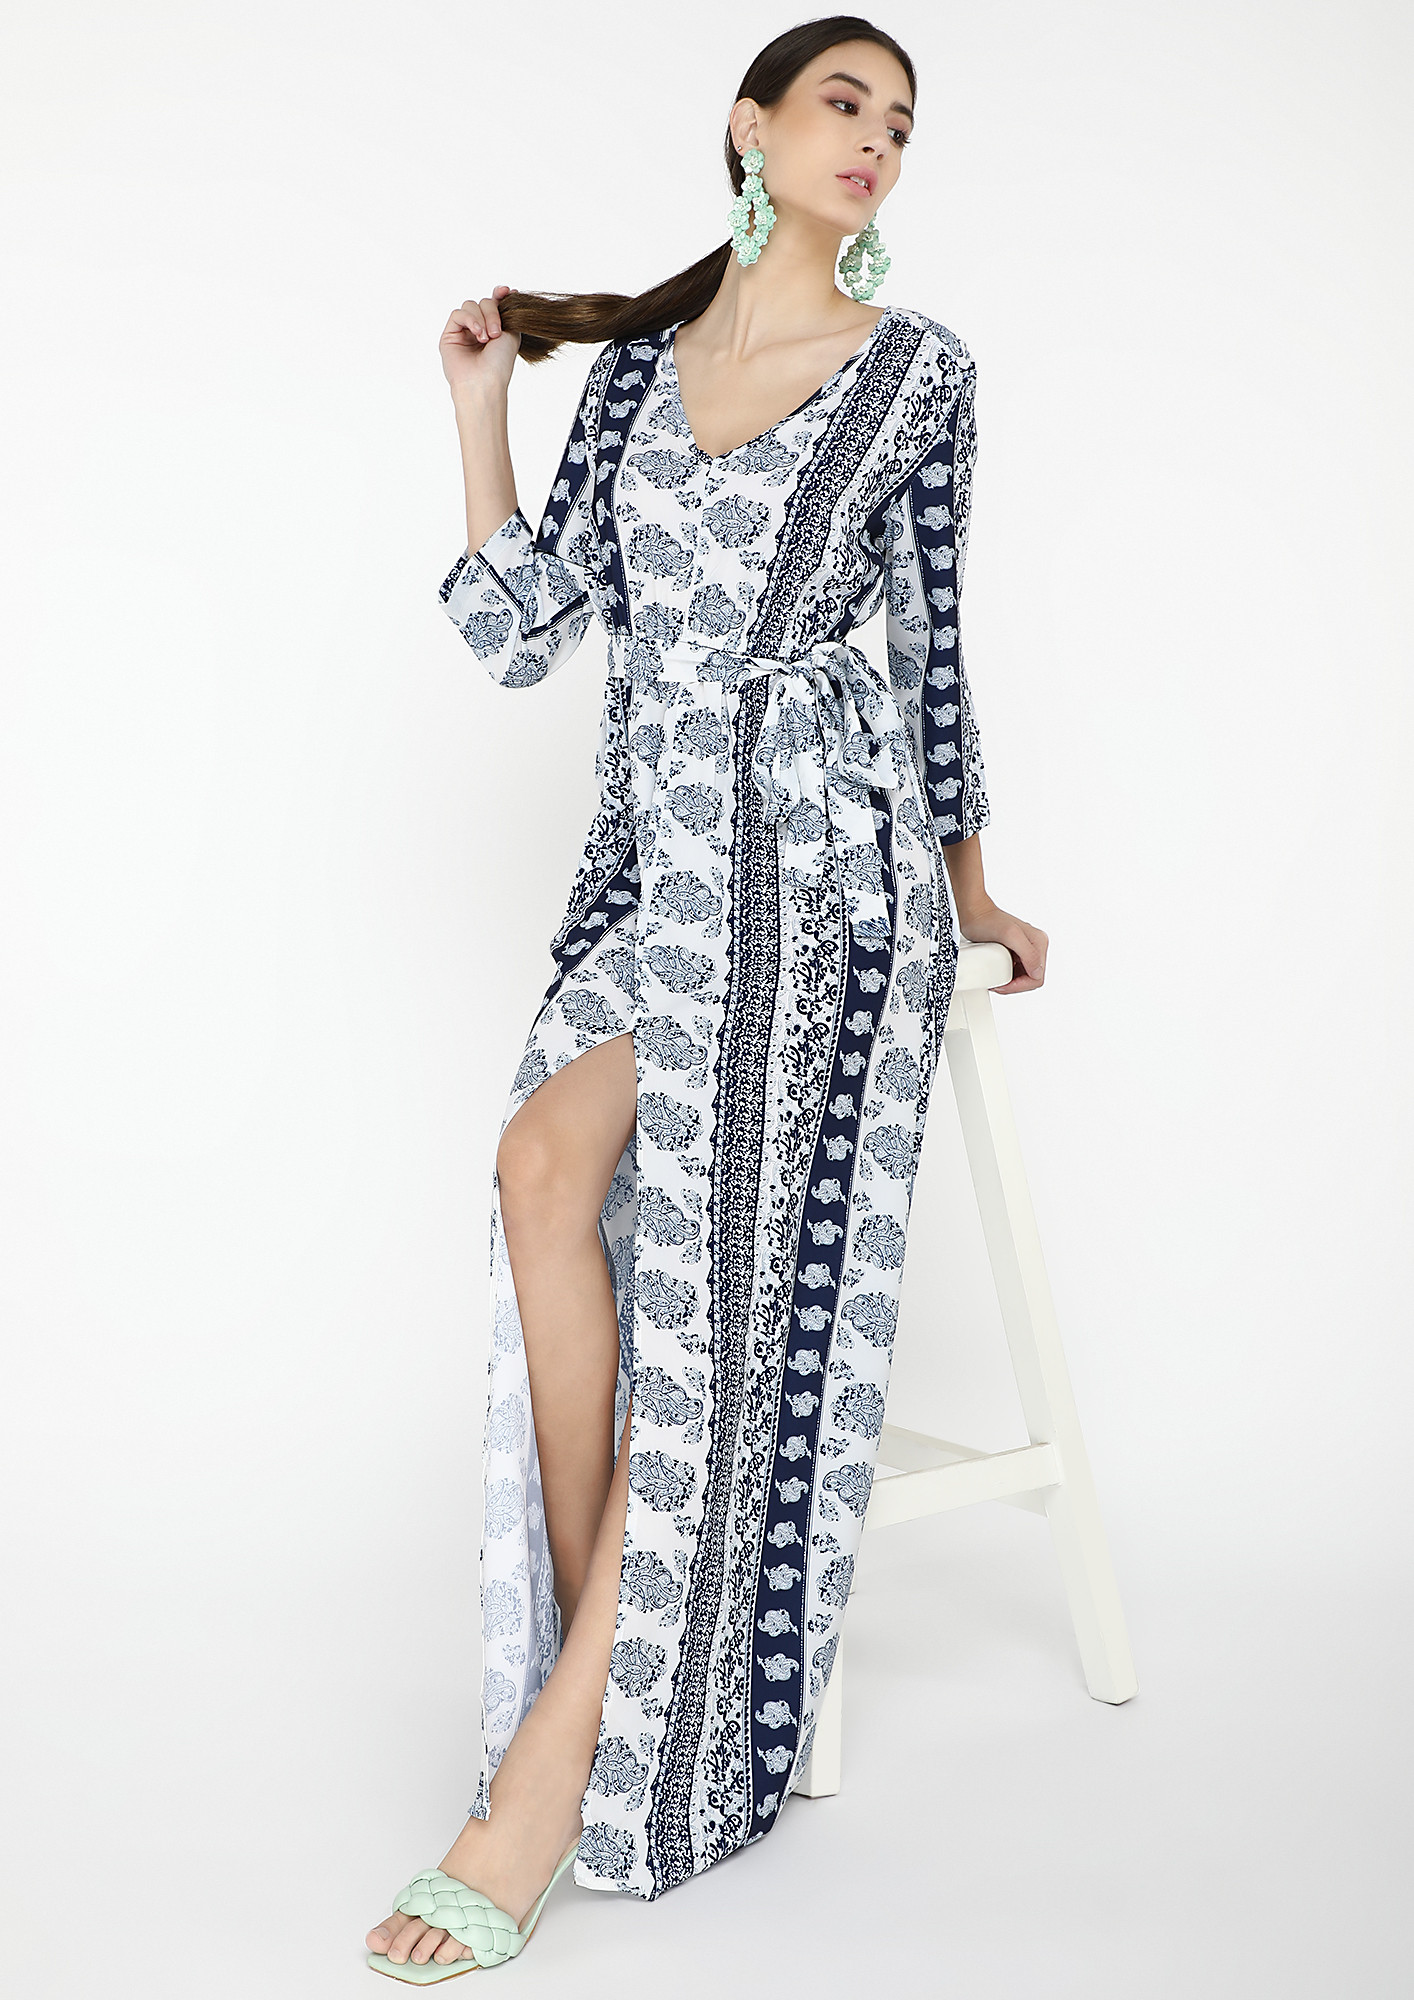 EASY BREEZY BLUE AND WHITE PRINTED MAXI DRESS